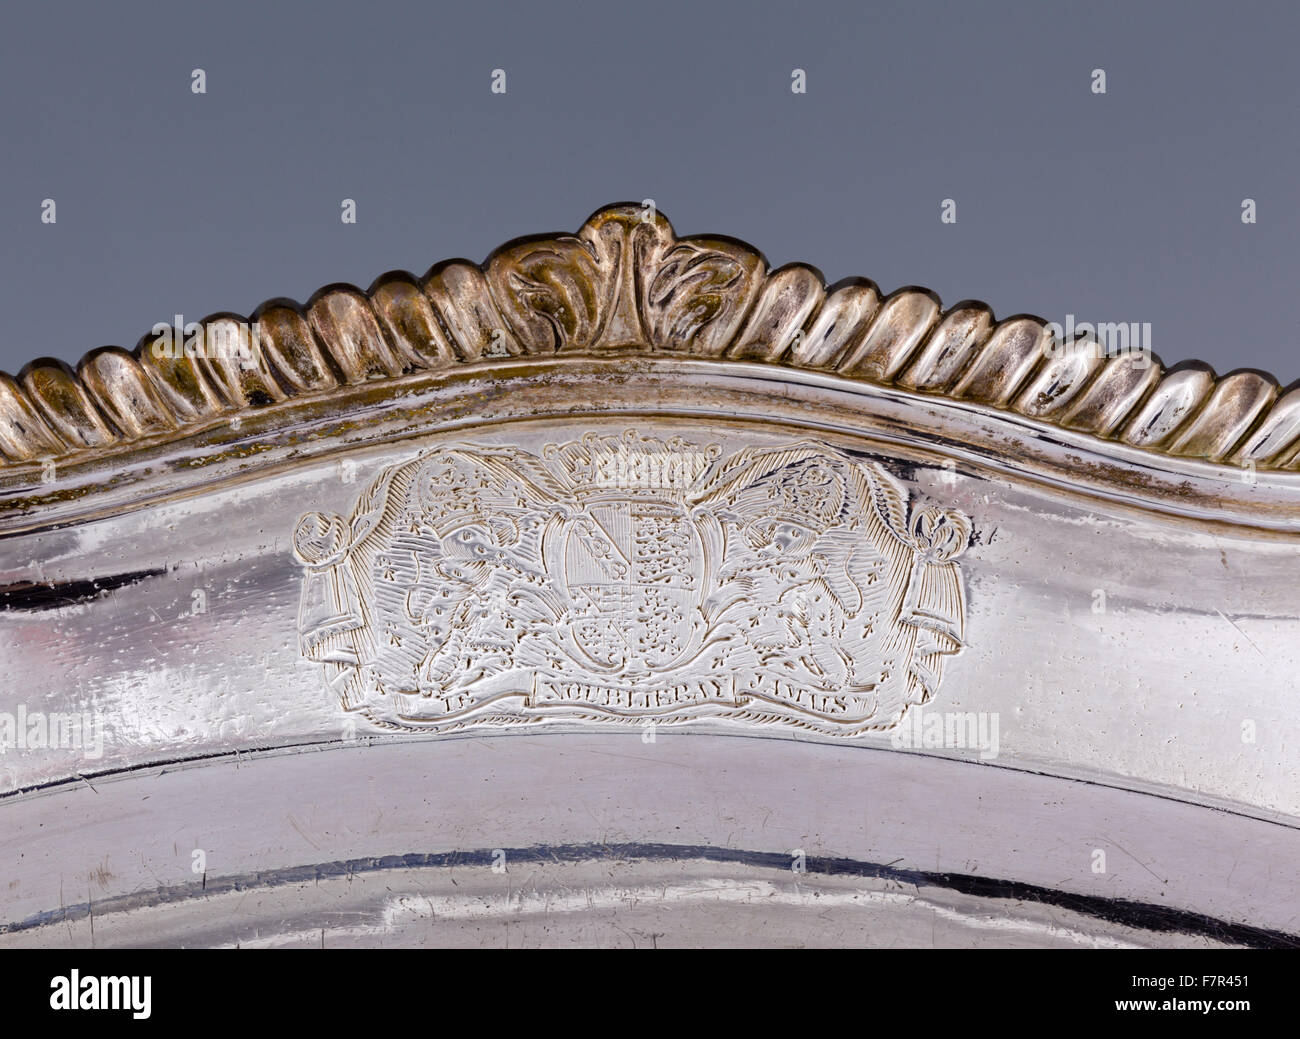 Oval meat dish, probably Frederick Kandler, c. 1751, silver at Ickworth, Suffolk. Length 14 ¾ inches. Detail of engraved arms of the 2nd Earl of Bristol. National Trust Images 852096.1. Stock Photo